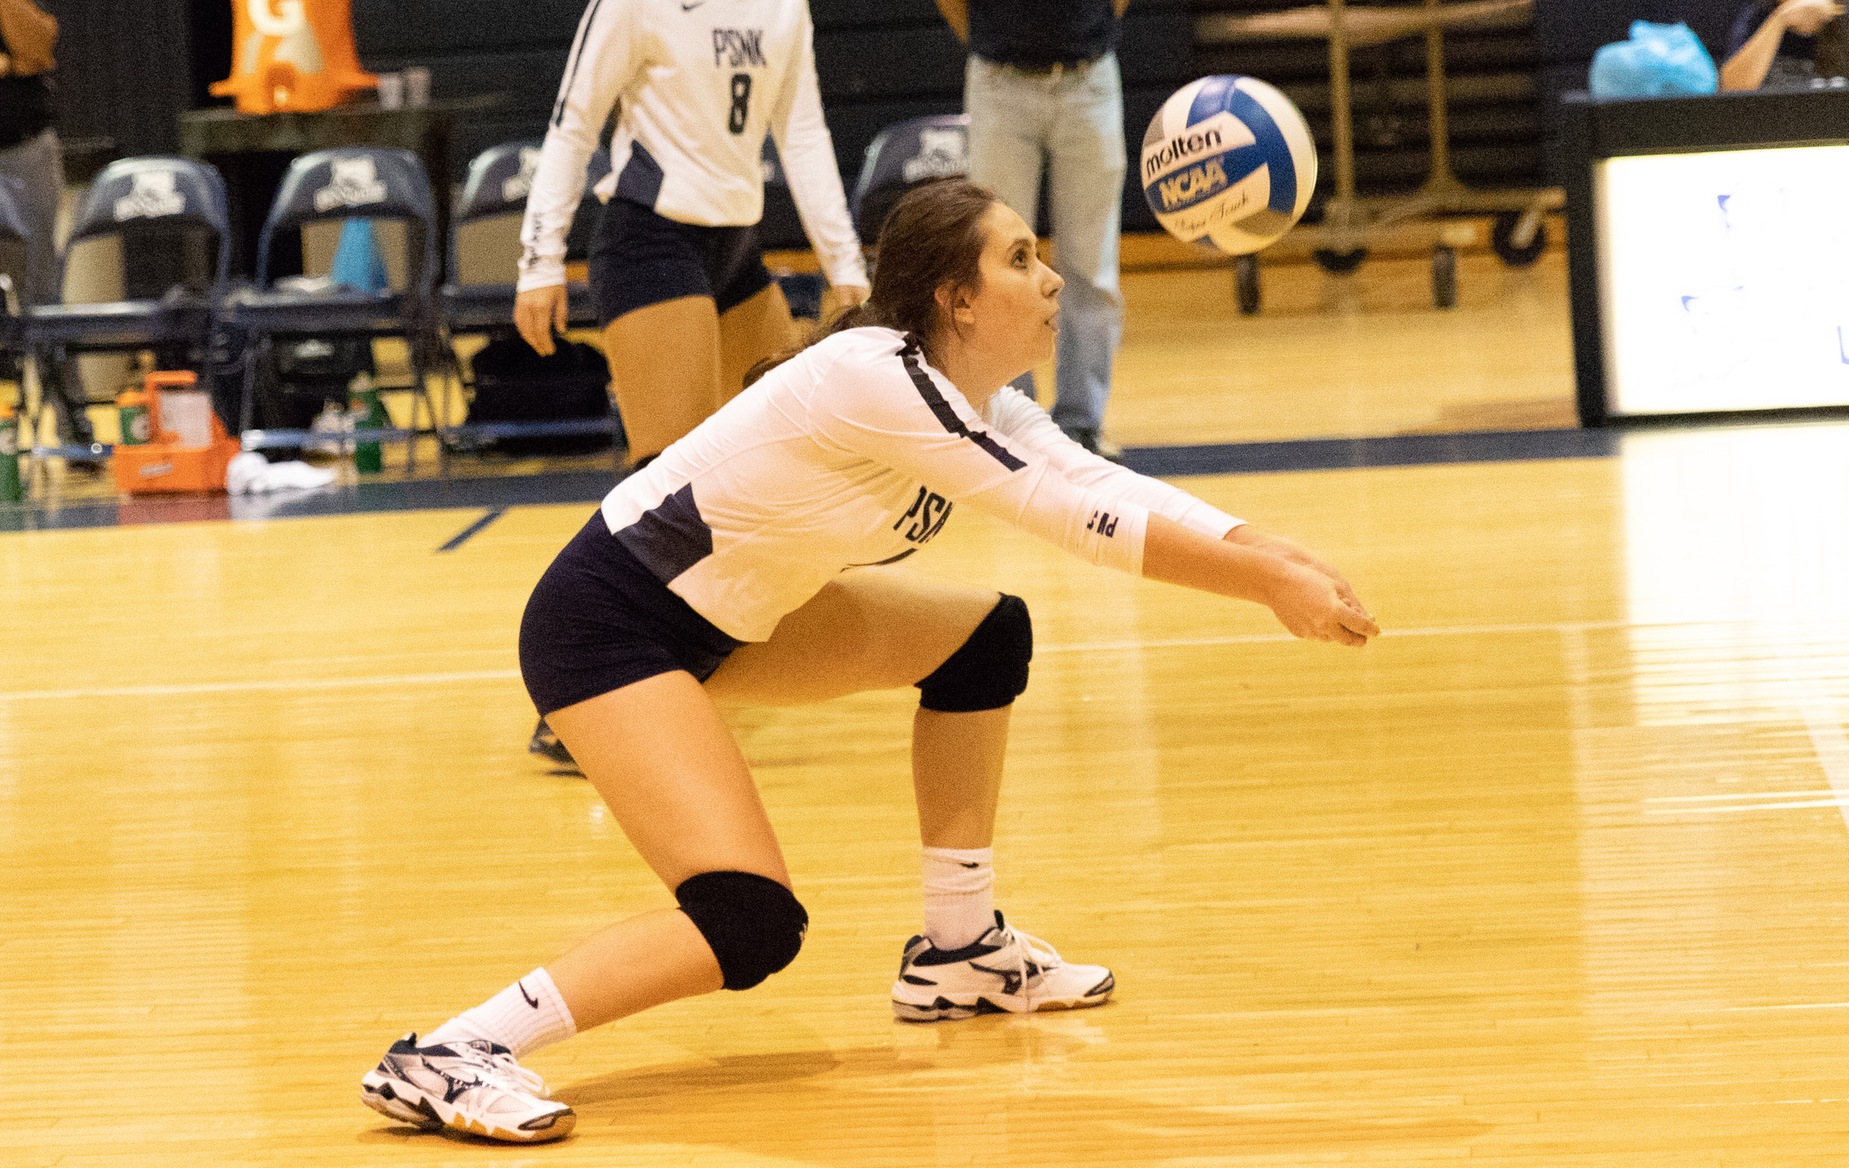 New Kensington Sweeps WCCC in Women's Volleyball